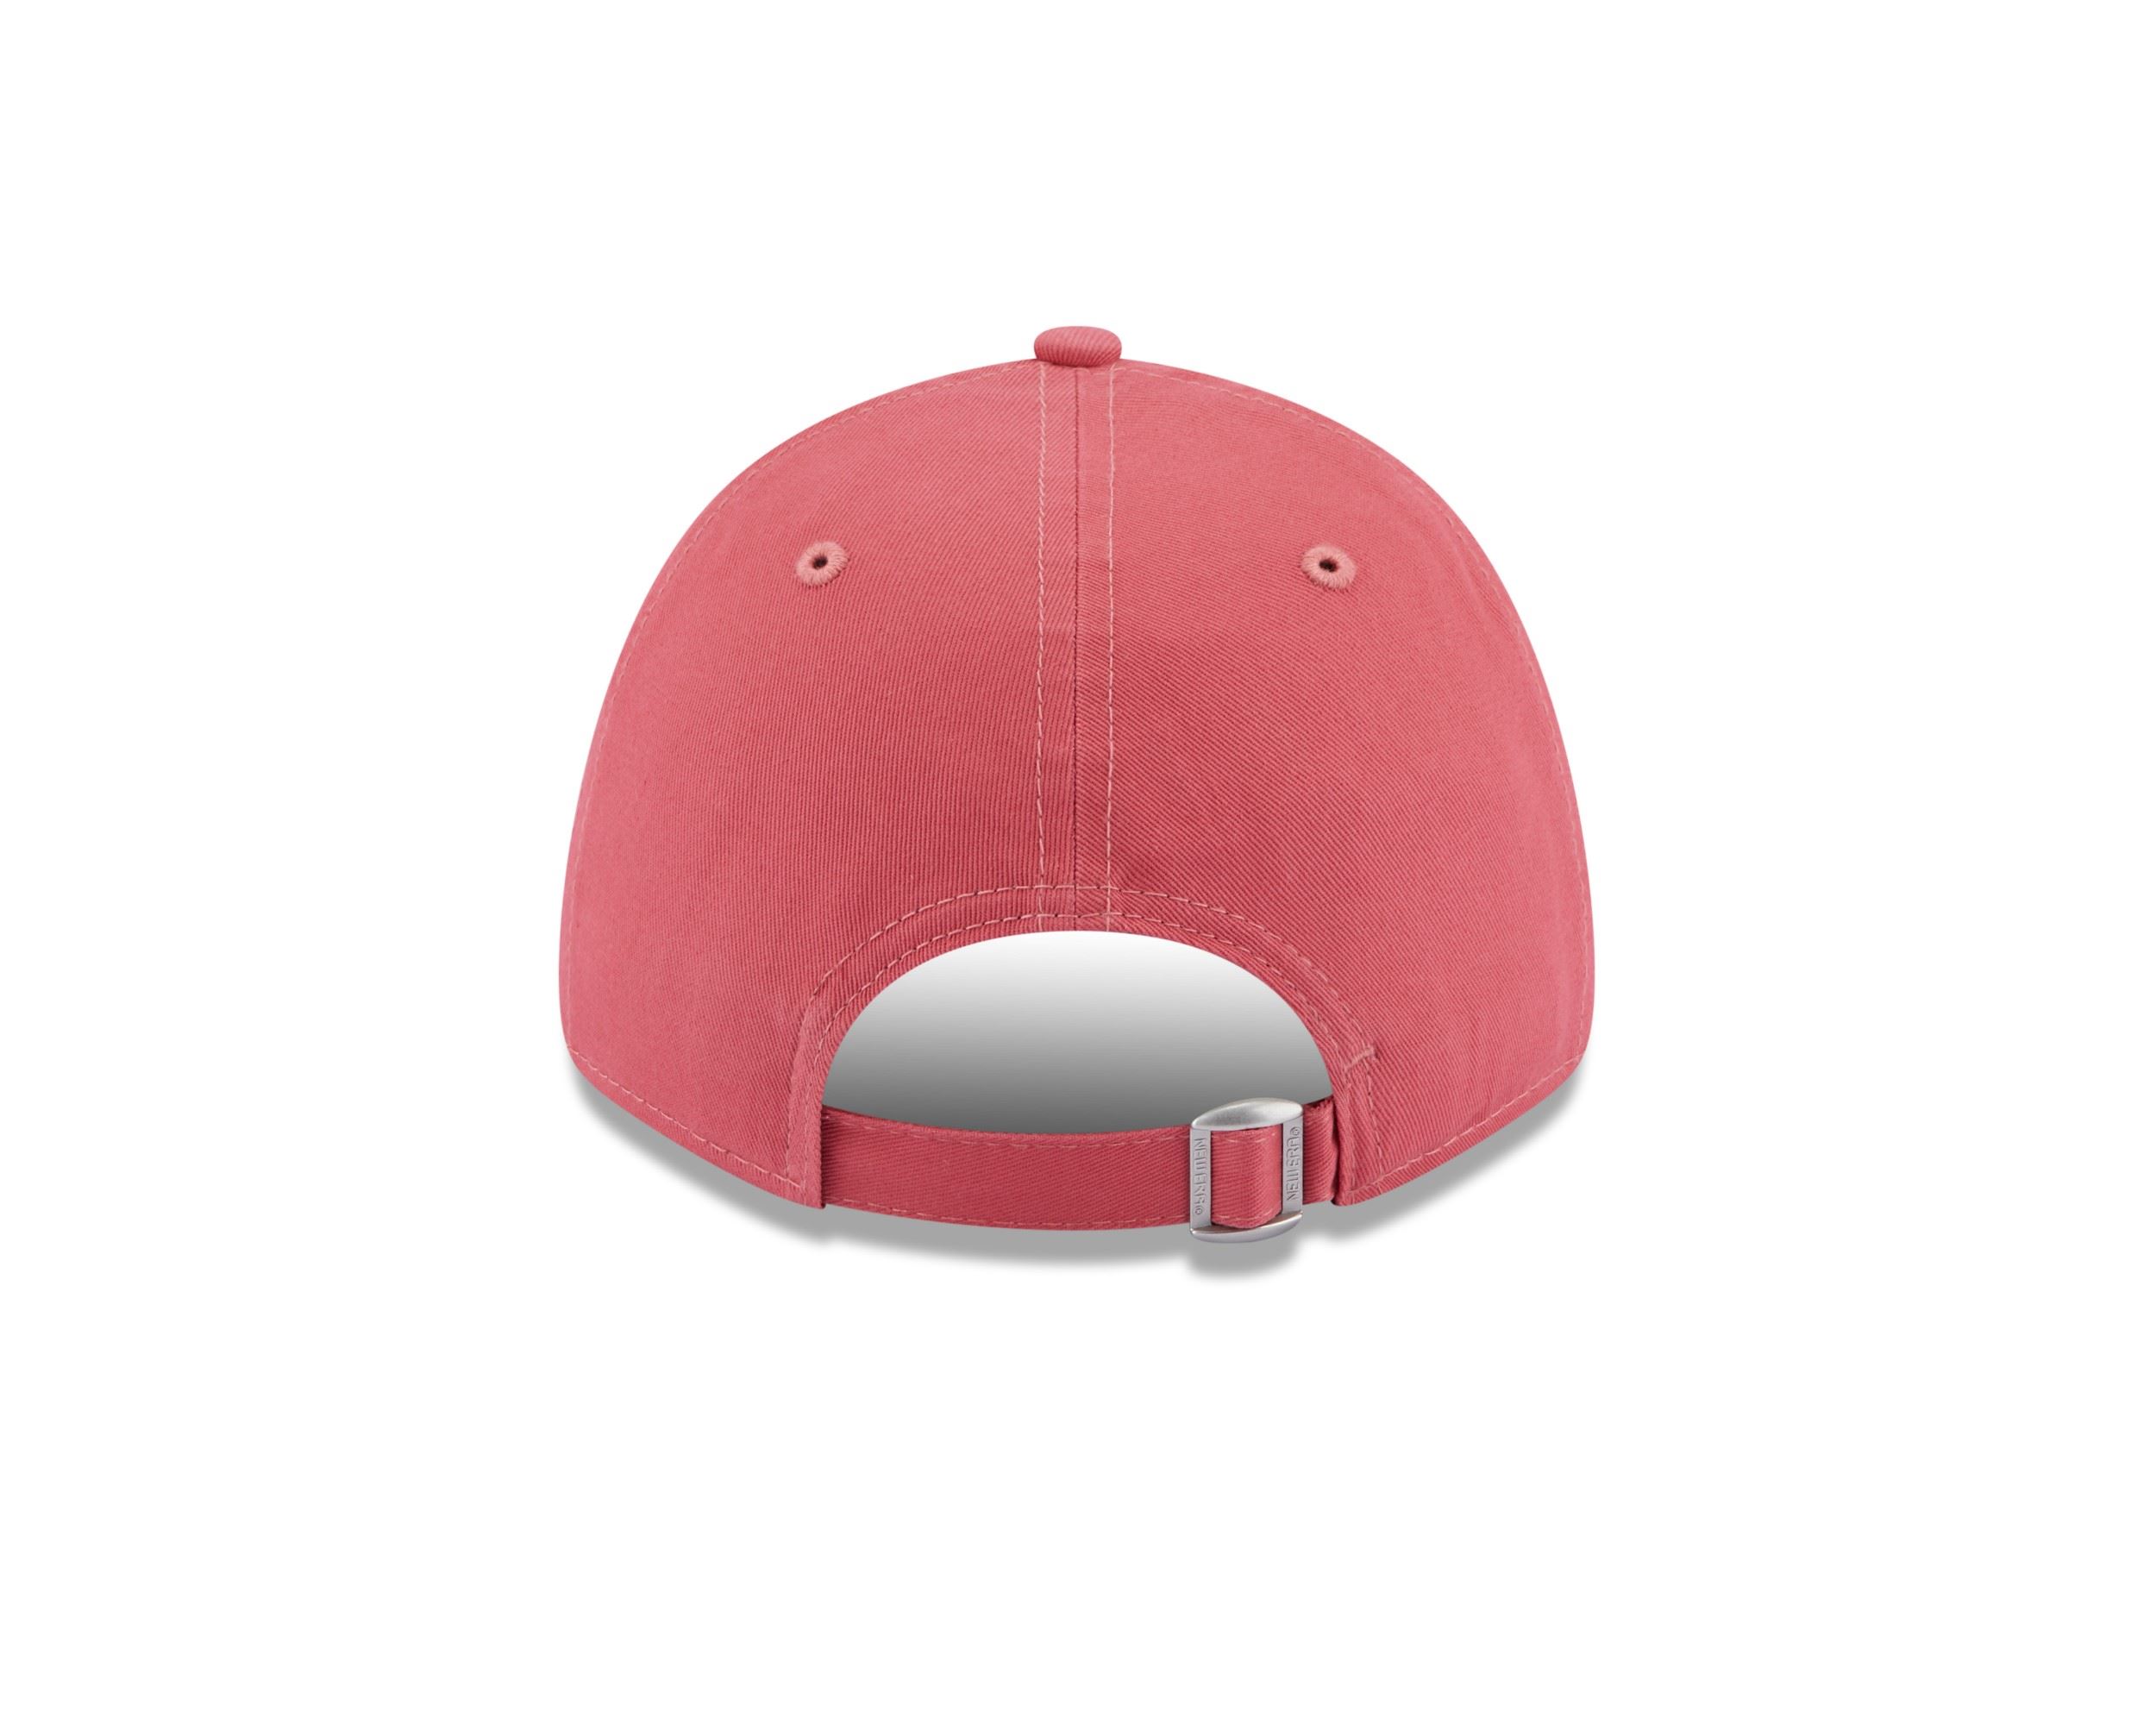 New York Yankees MLB League Essential Pink 9Forty Adjustable Cap New Era